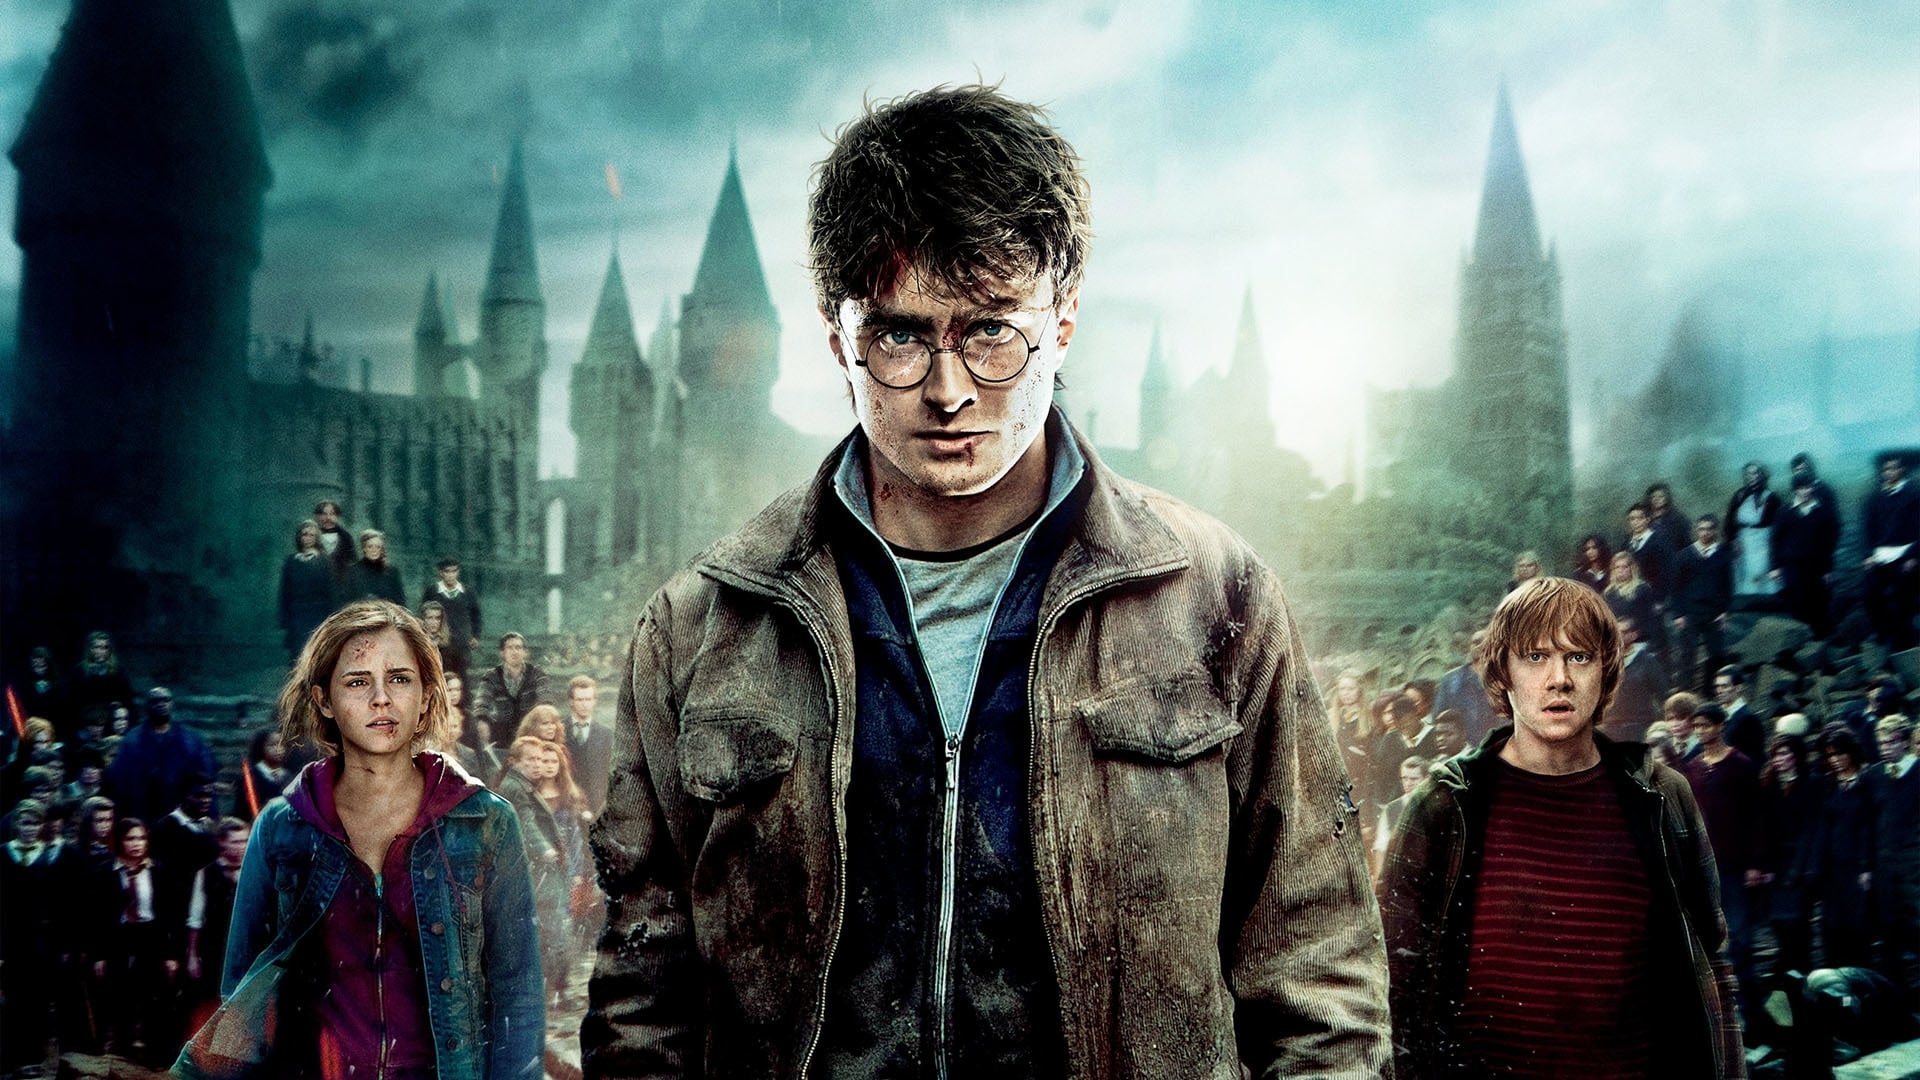 Harry Potter and the Deathly Hallows - Part 1 hindi dubbed 720p movies